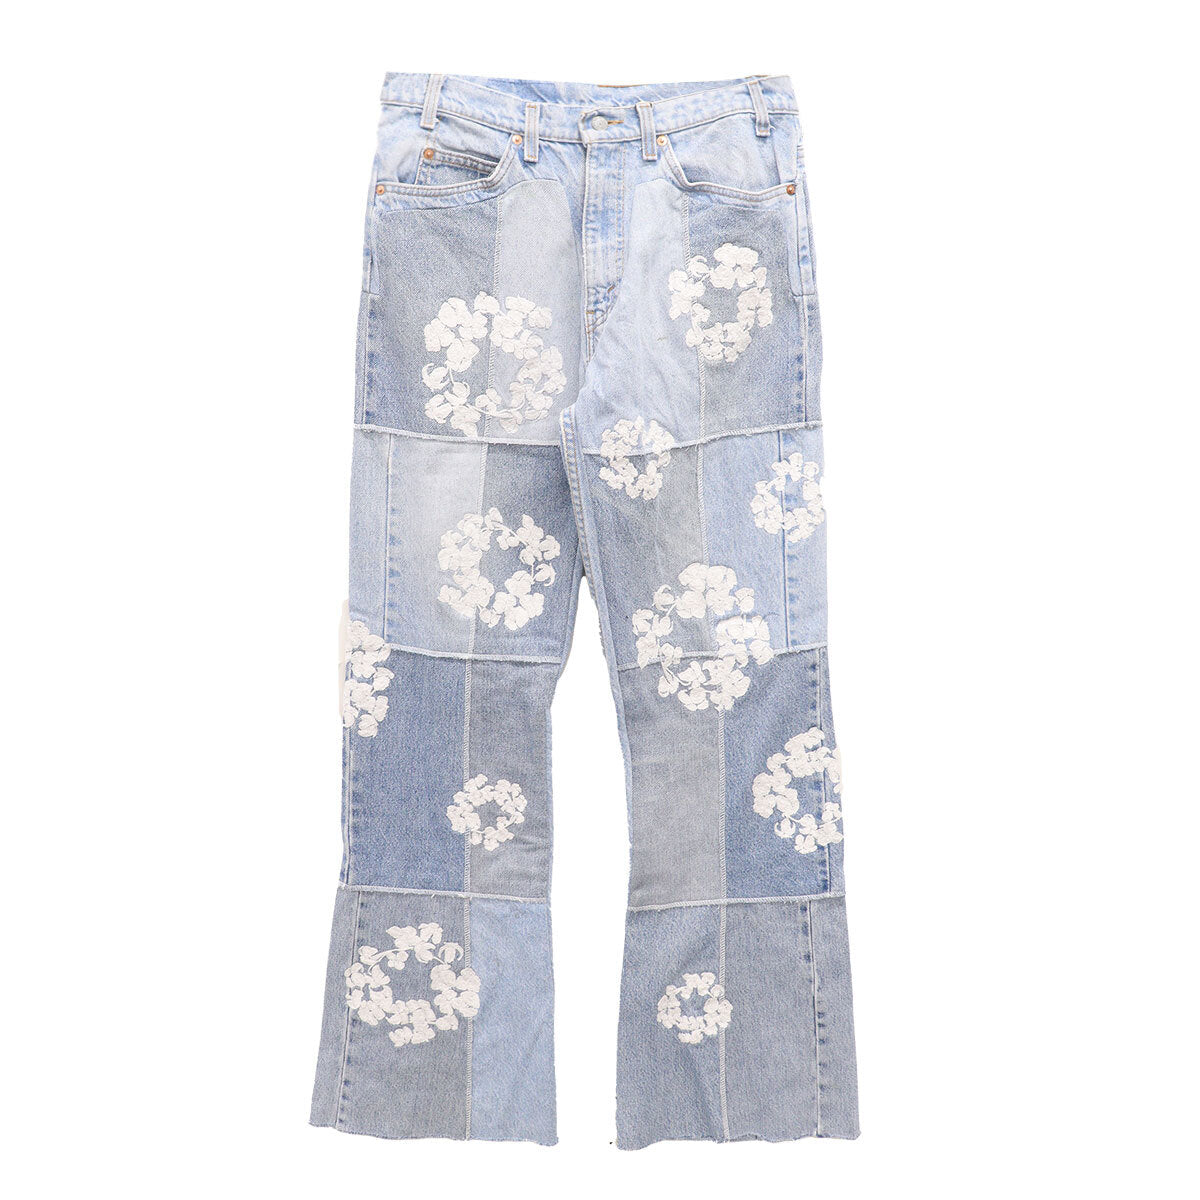 COTTON WREATH DENIM (C) | Why are you here?